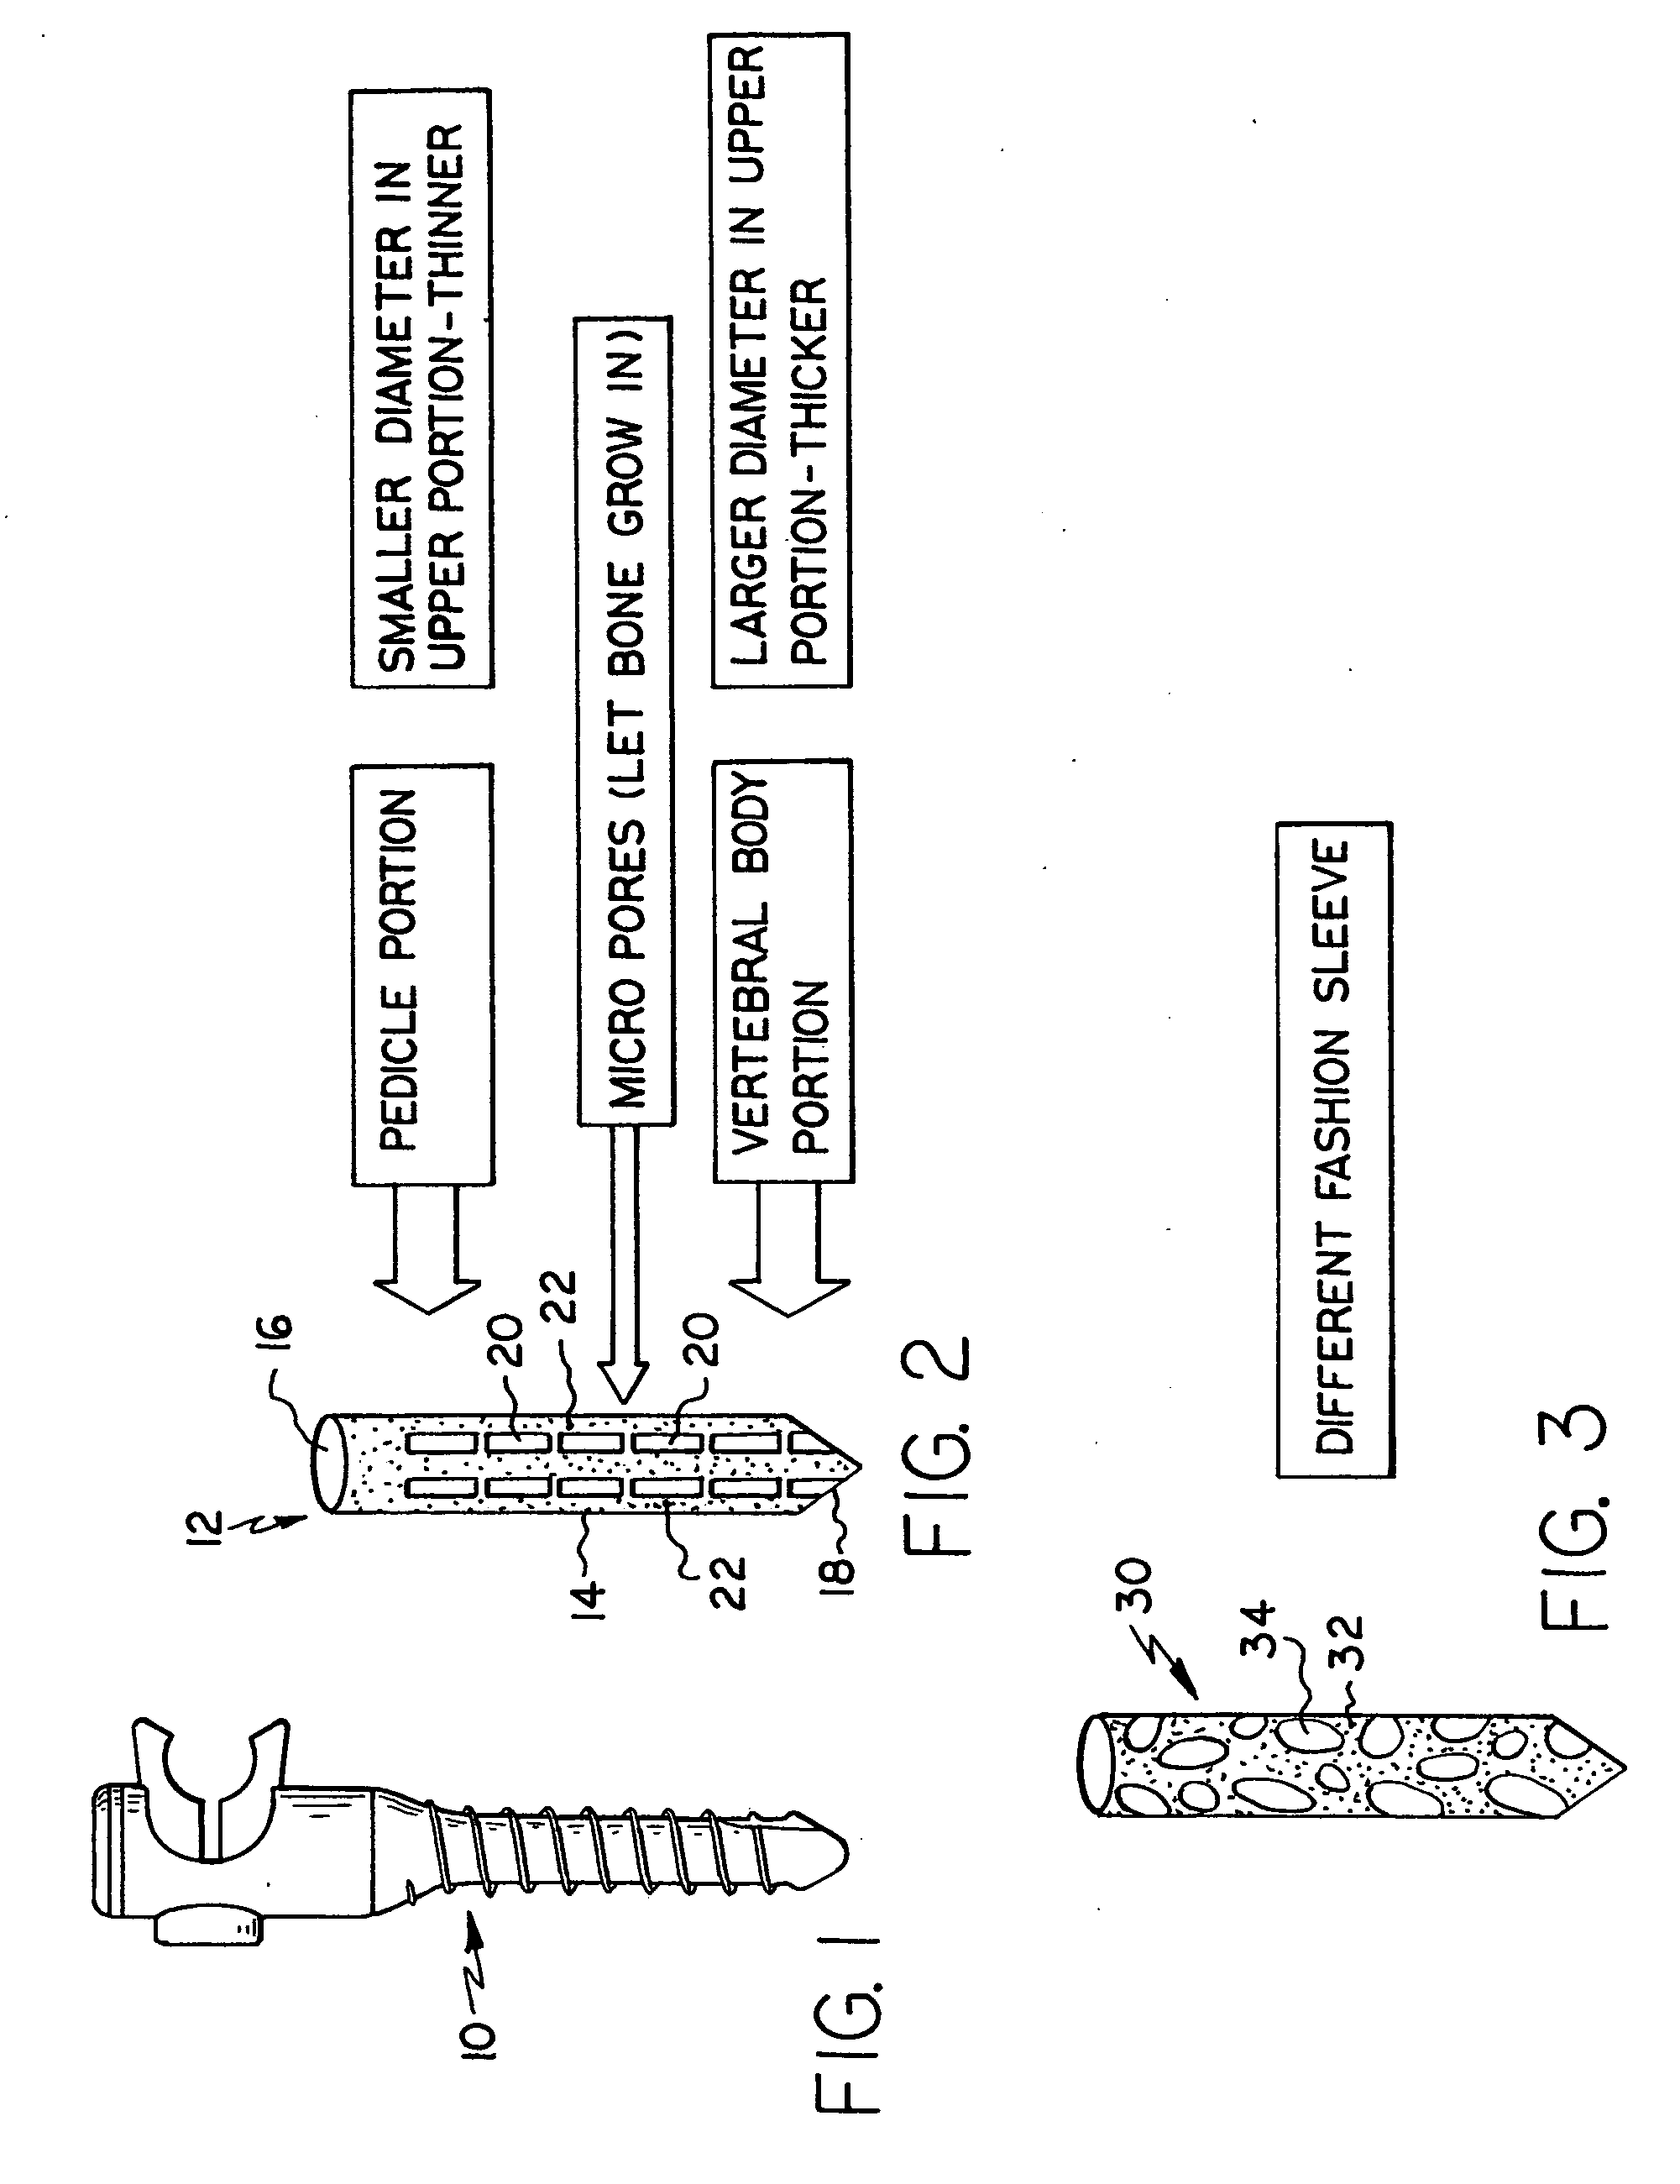 Screw sleeve made of polyetheretherketone (PEEK) for augmentation of bone screw insertion in osteoporotic or revision lumbar spine instrumentation